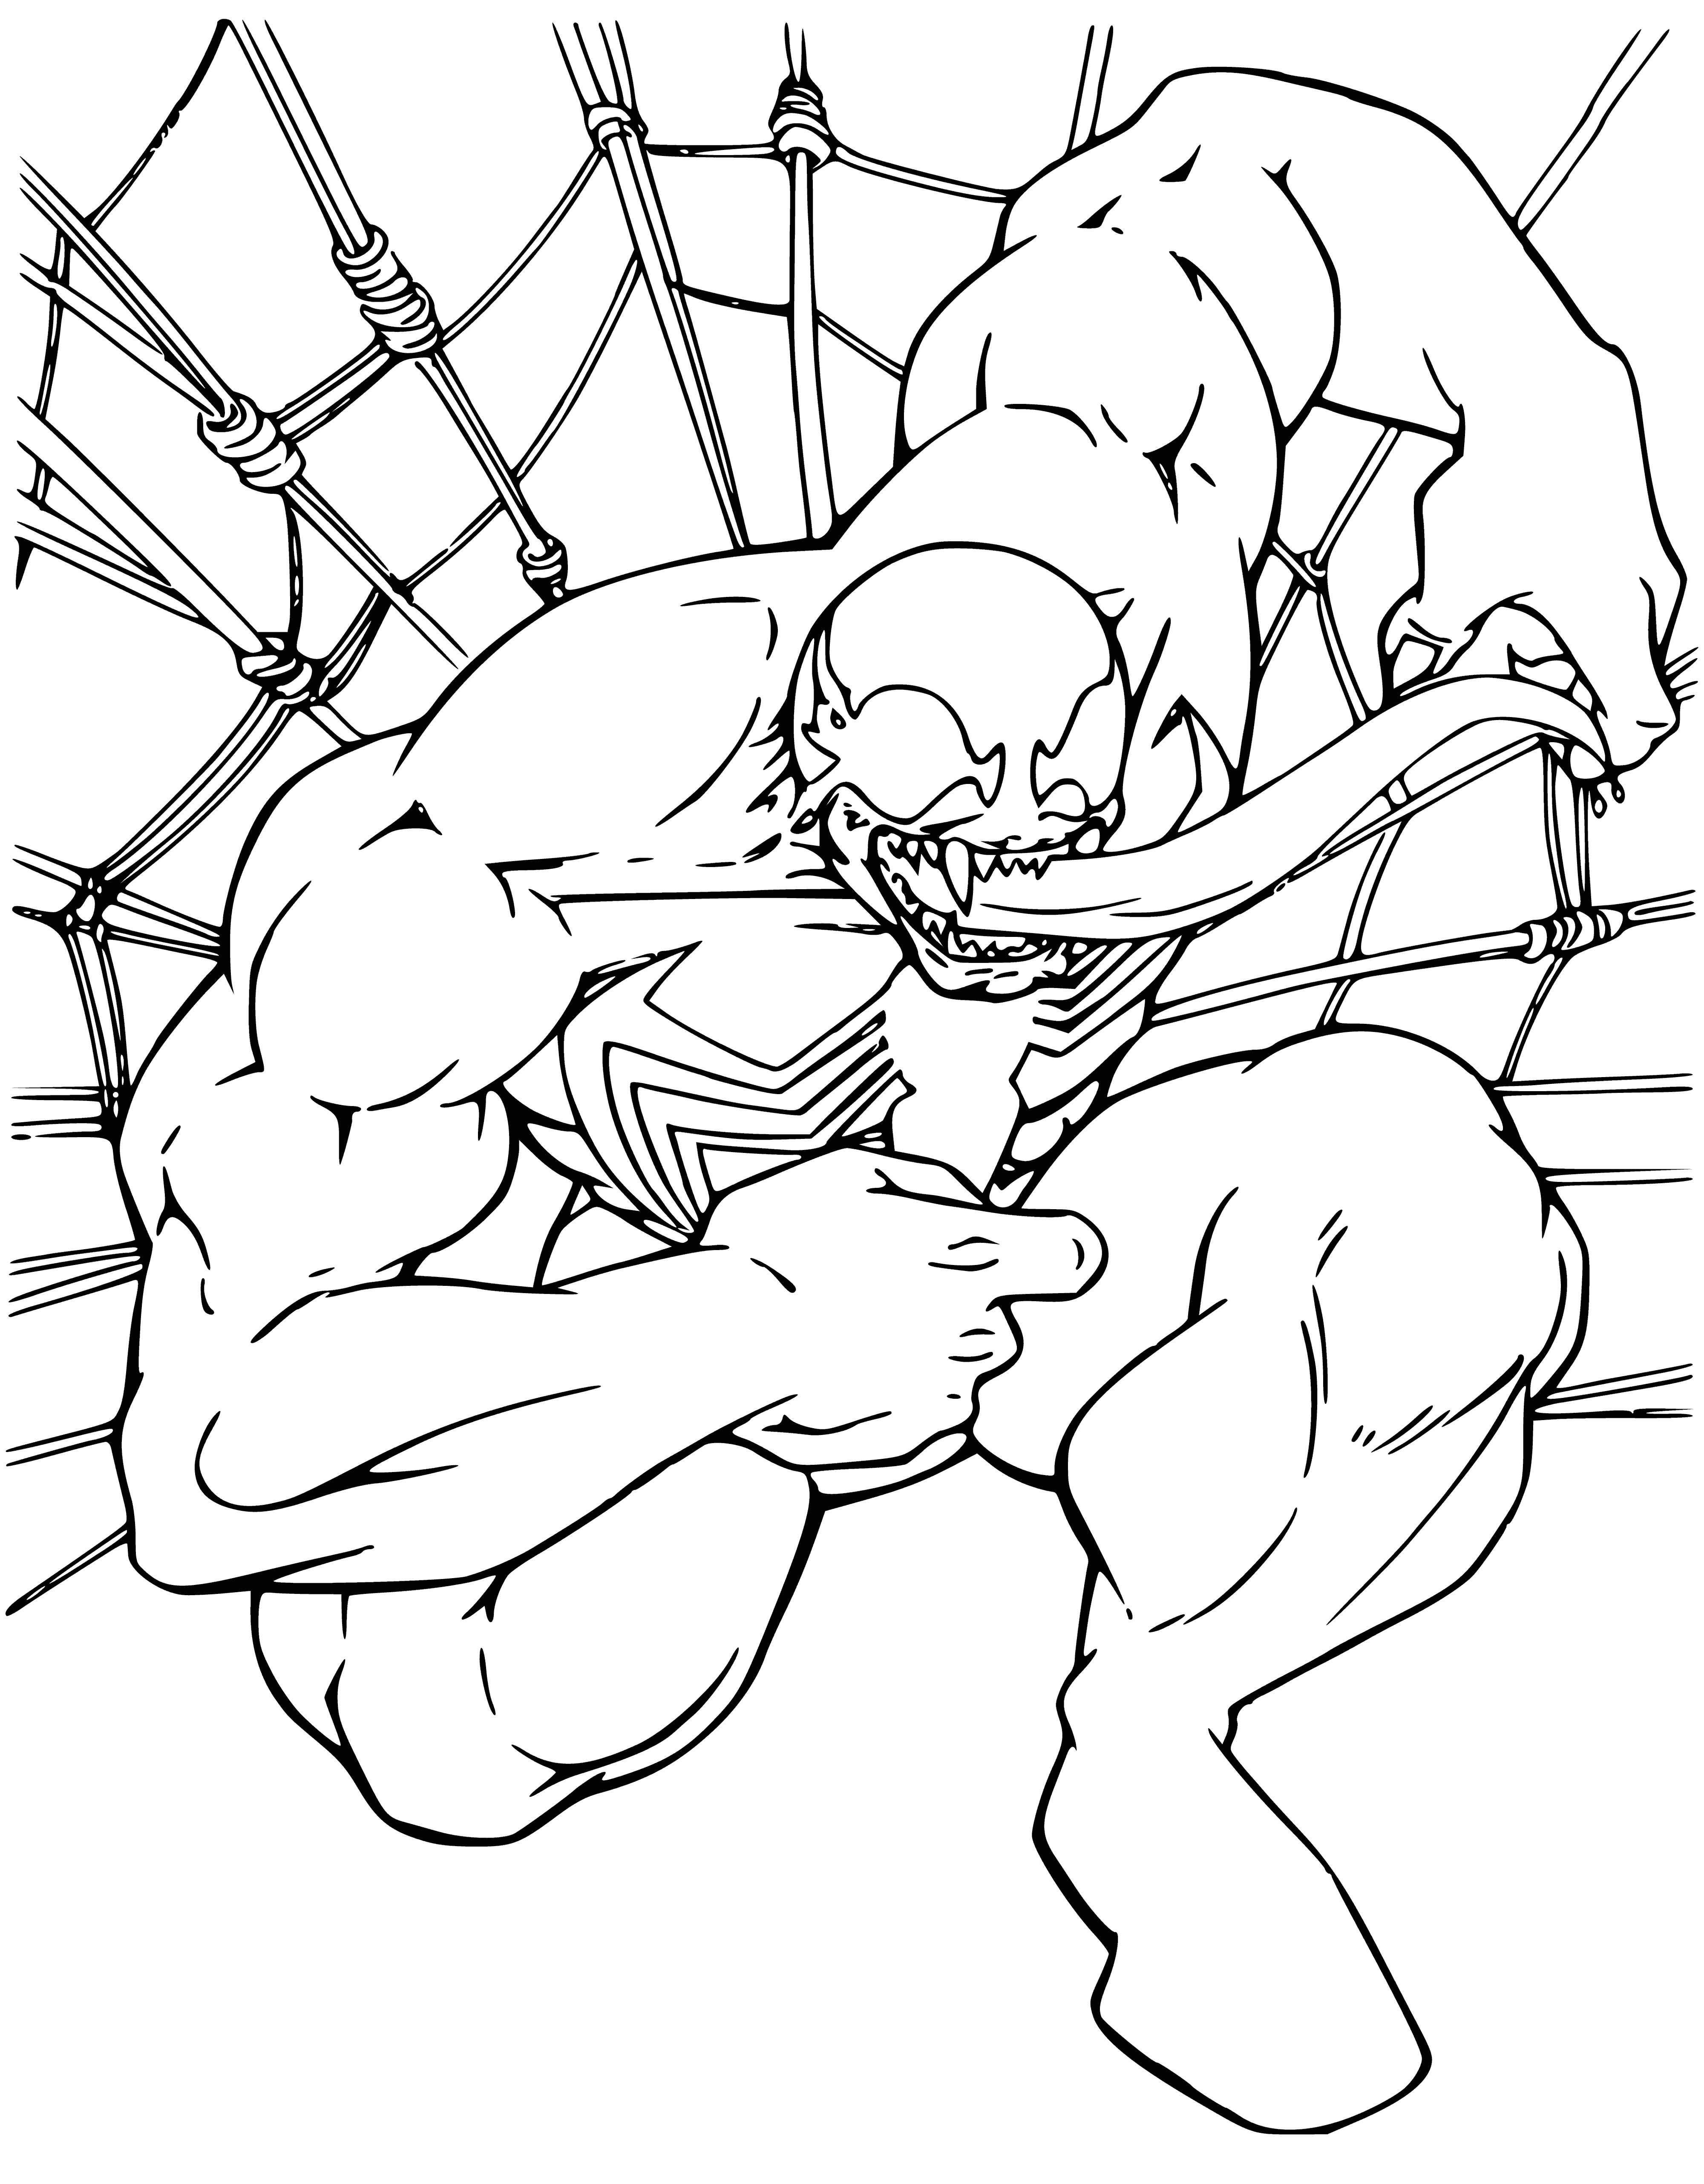 coloring page: Eight spiders crawl on a human skull against a black background in this coloring page.